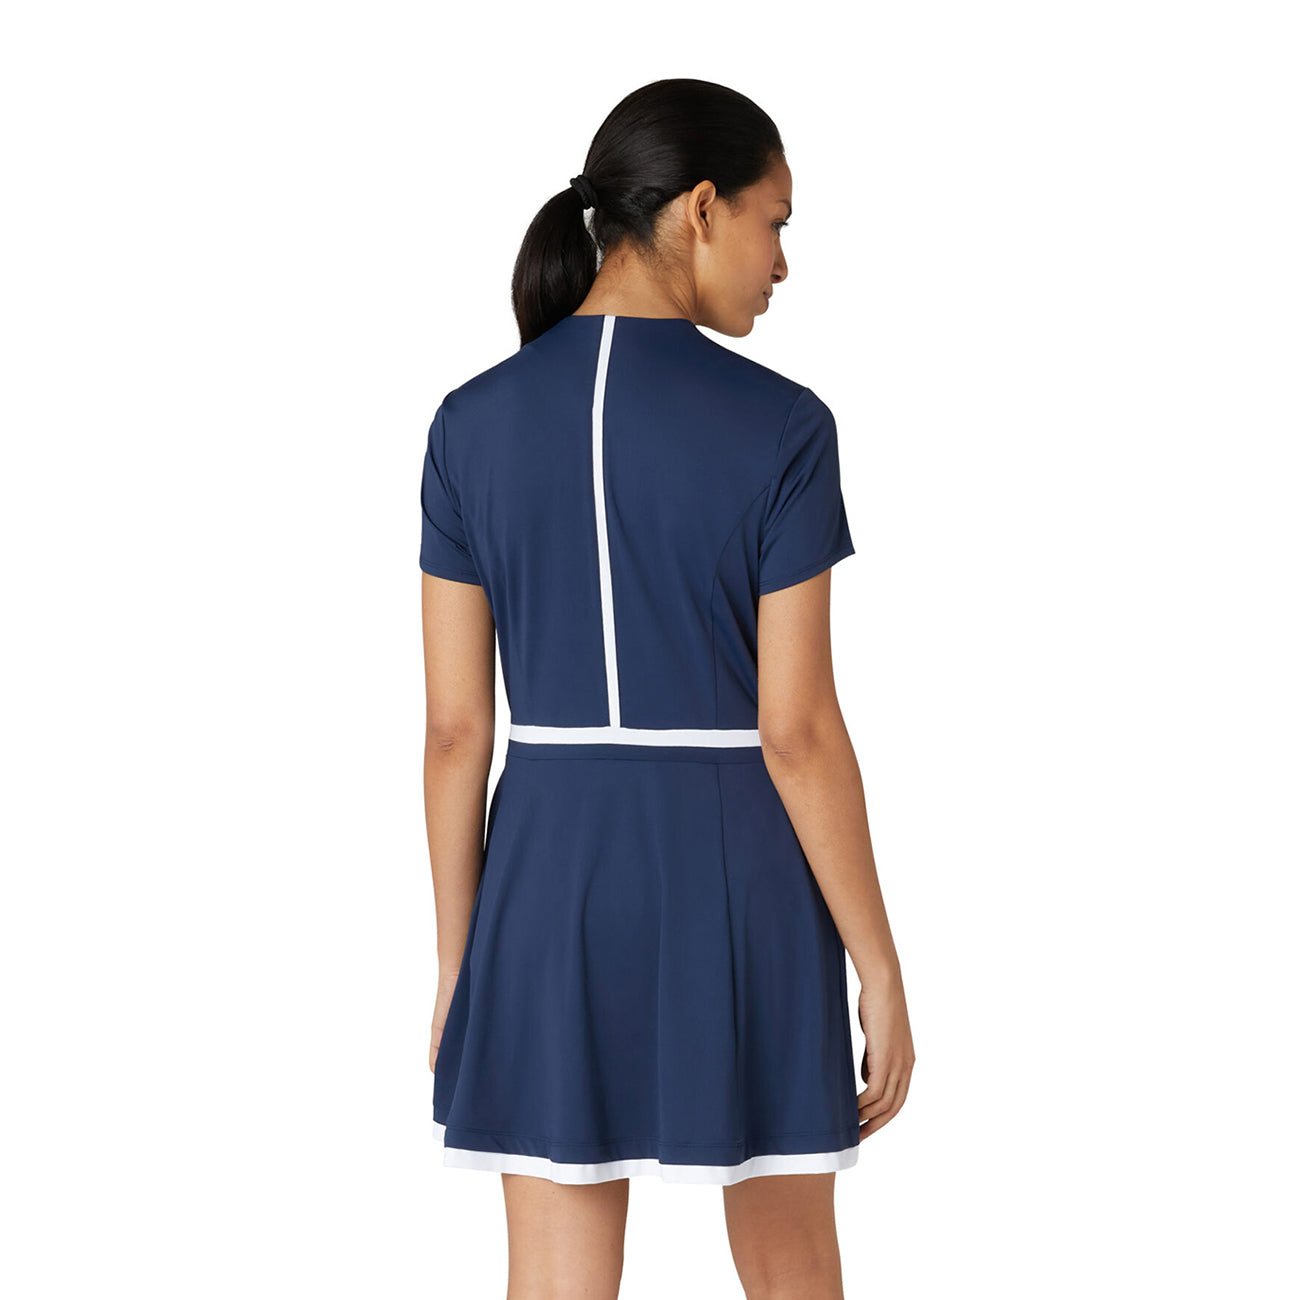 Original Penguin Womens Short Sleeve Dress in Navy With Contrast Piping